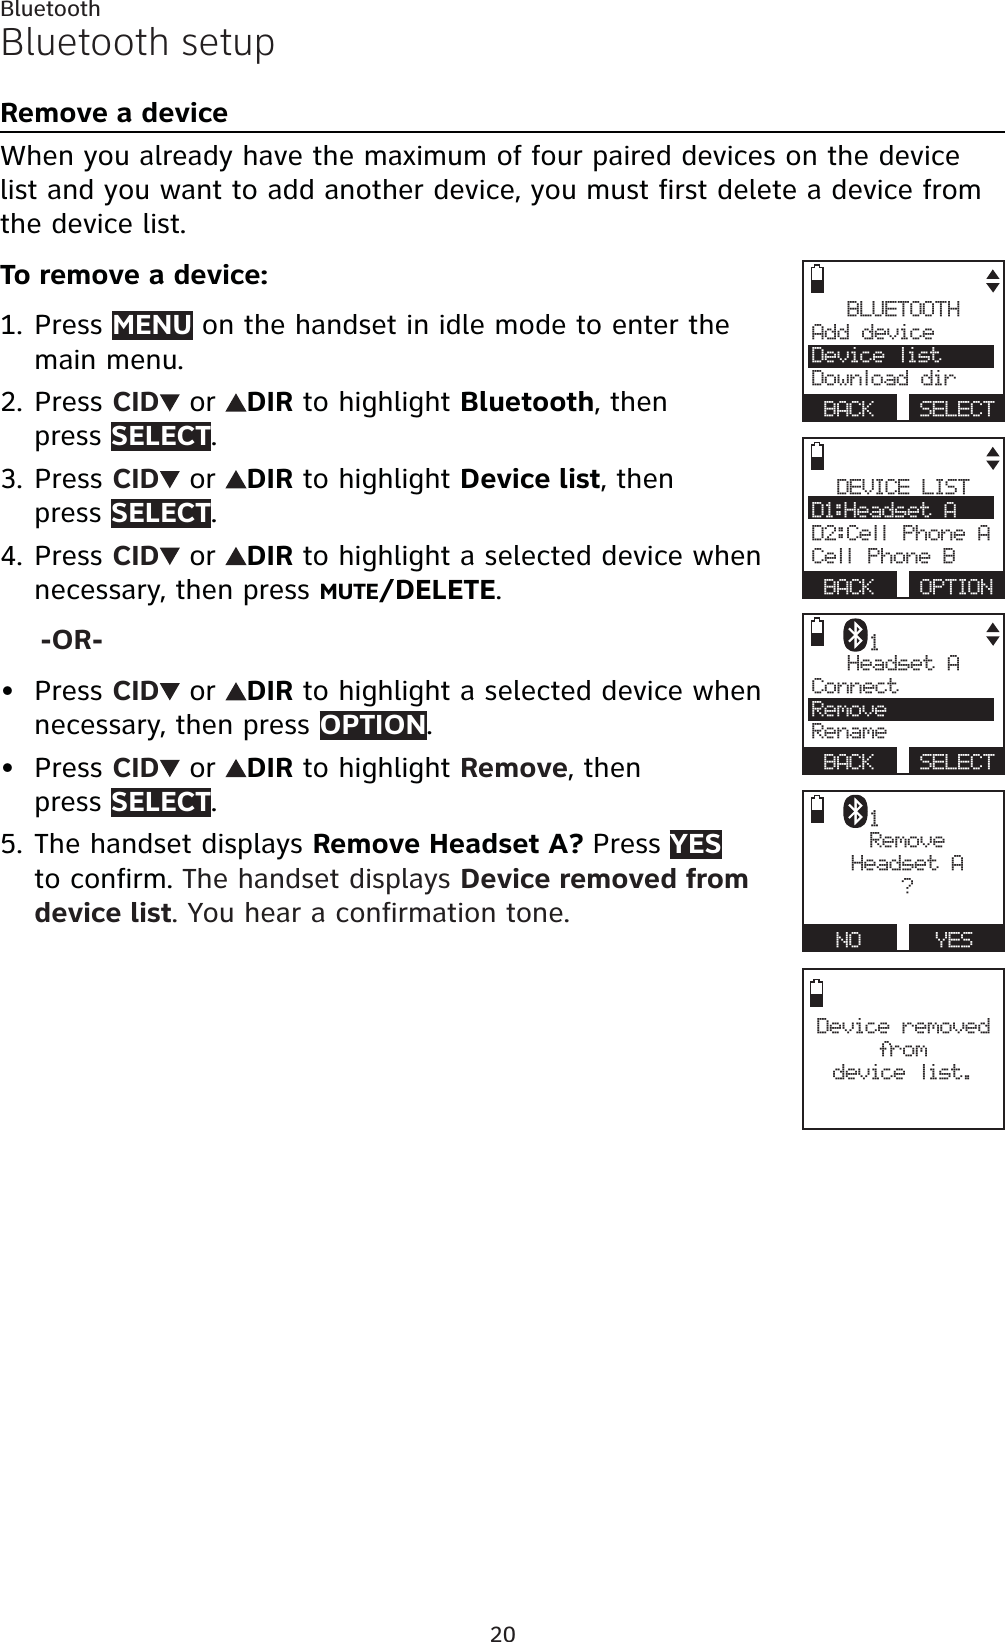 20BluetoothBluetooth setupRemove a deviceWhen you already have the maximum of four paired devices on the device list and you want to add another device, you must first delete a device from the device list.To remove a device:Press MENU on the handset in idle mode to enter the main menu.Press CID  or  DIR to highlight Bluetooth, then press SELECT.Press CID  or  DIR to highlight Device list, then press SELECT.Press CID  or  DIR to highlight a selected device when necessary, then press MUTE/DELETE.-OR-Press CID  or  DIR to highlight a selected device when necessary, then press OPTION.Press CID  or  DIR to highlight Remove, then press SELECT.The handset displays Remove Headset A? Press YESto confirm. The handset displays Device removed from device list. You hear a confirmation tone.1.2.3.4.••5.BLUETOOTHAdd device Device listDownload dirBACK SELECTDevice removed from device list.DEVICE LISTD1:Headset AD2:Cell Phone ACell Phone BBACK OPTIONHeadset AConnect RemoveRenameBACK SELECT1RemoveHeadset A?NO   YES1